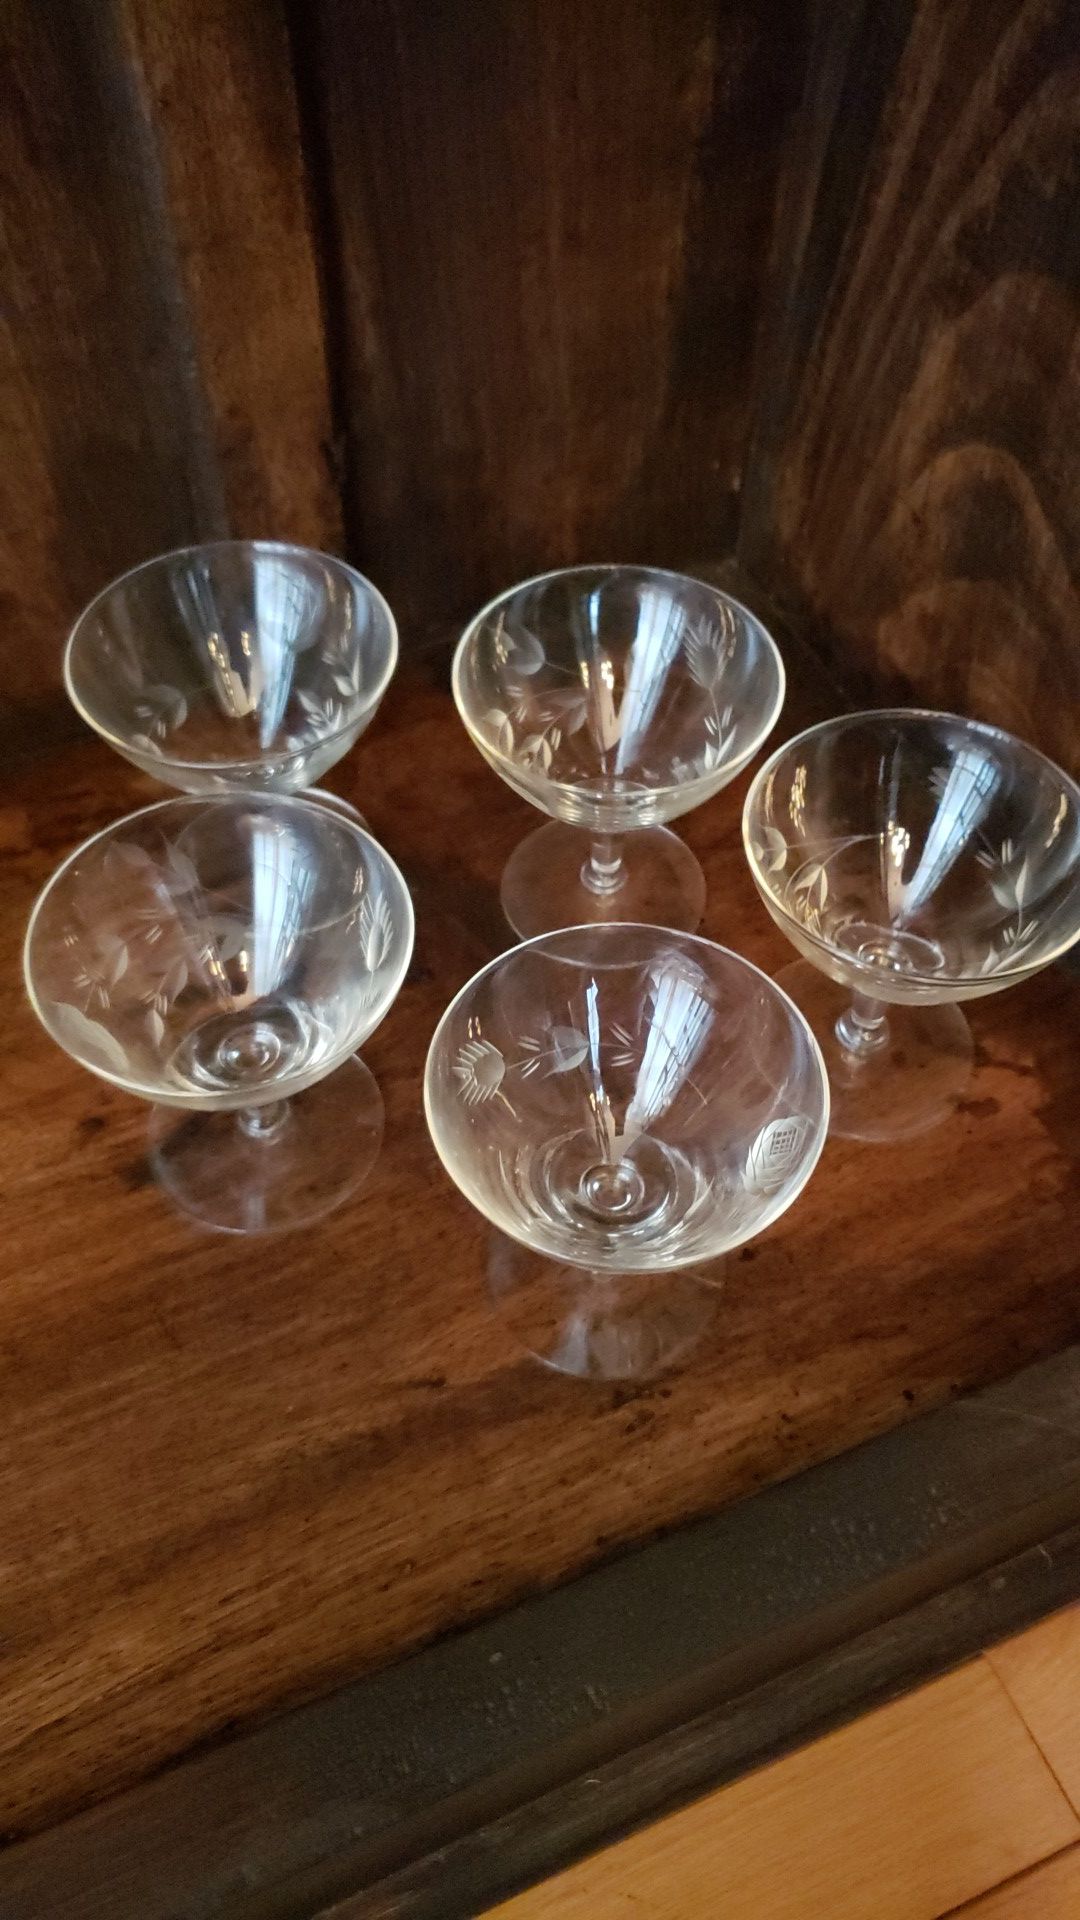 5 Antique Champagne Glasses - Moving must sell